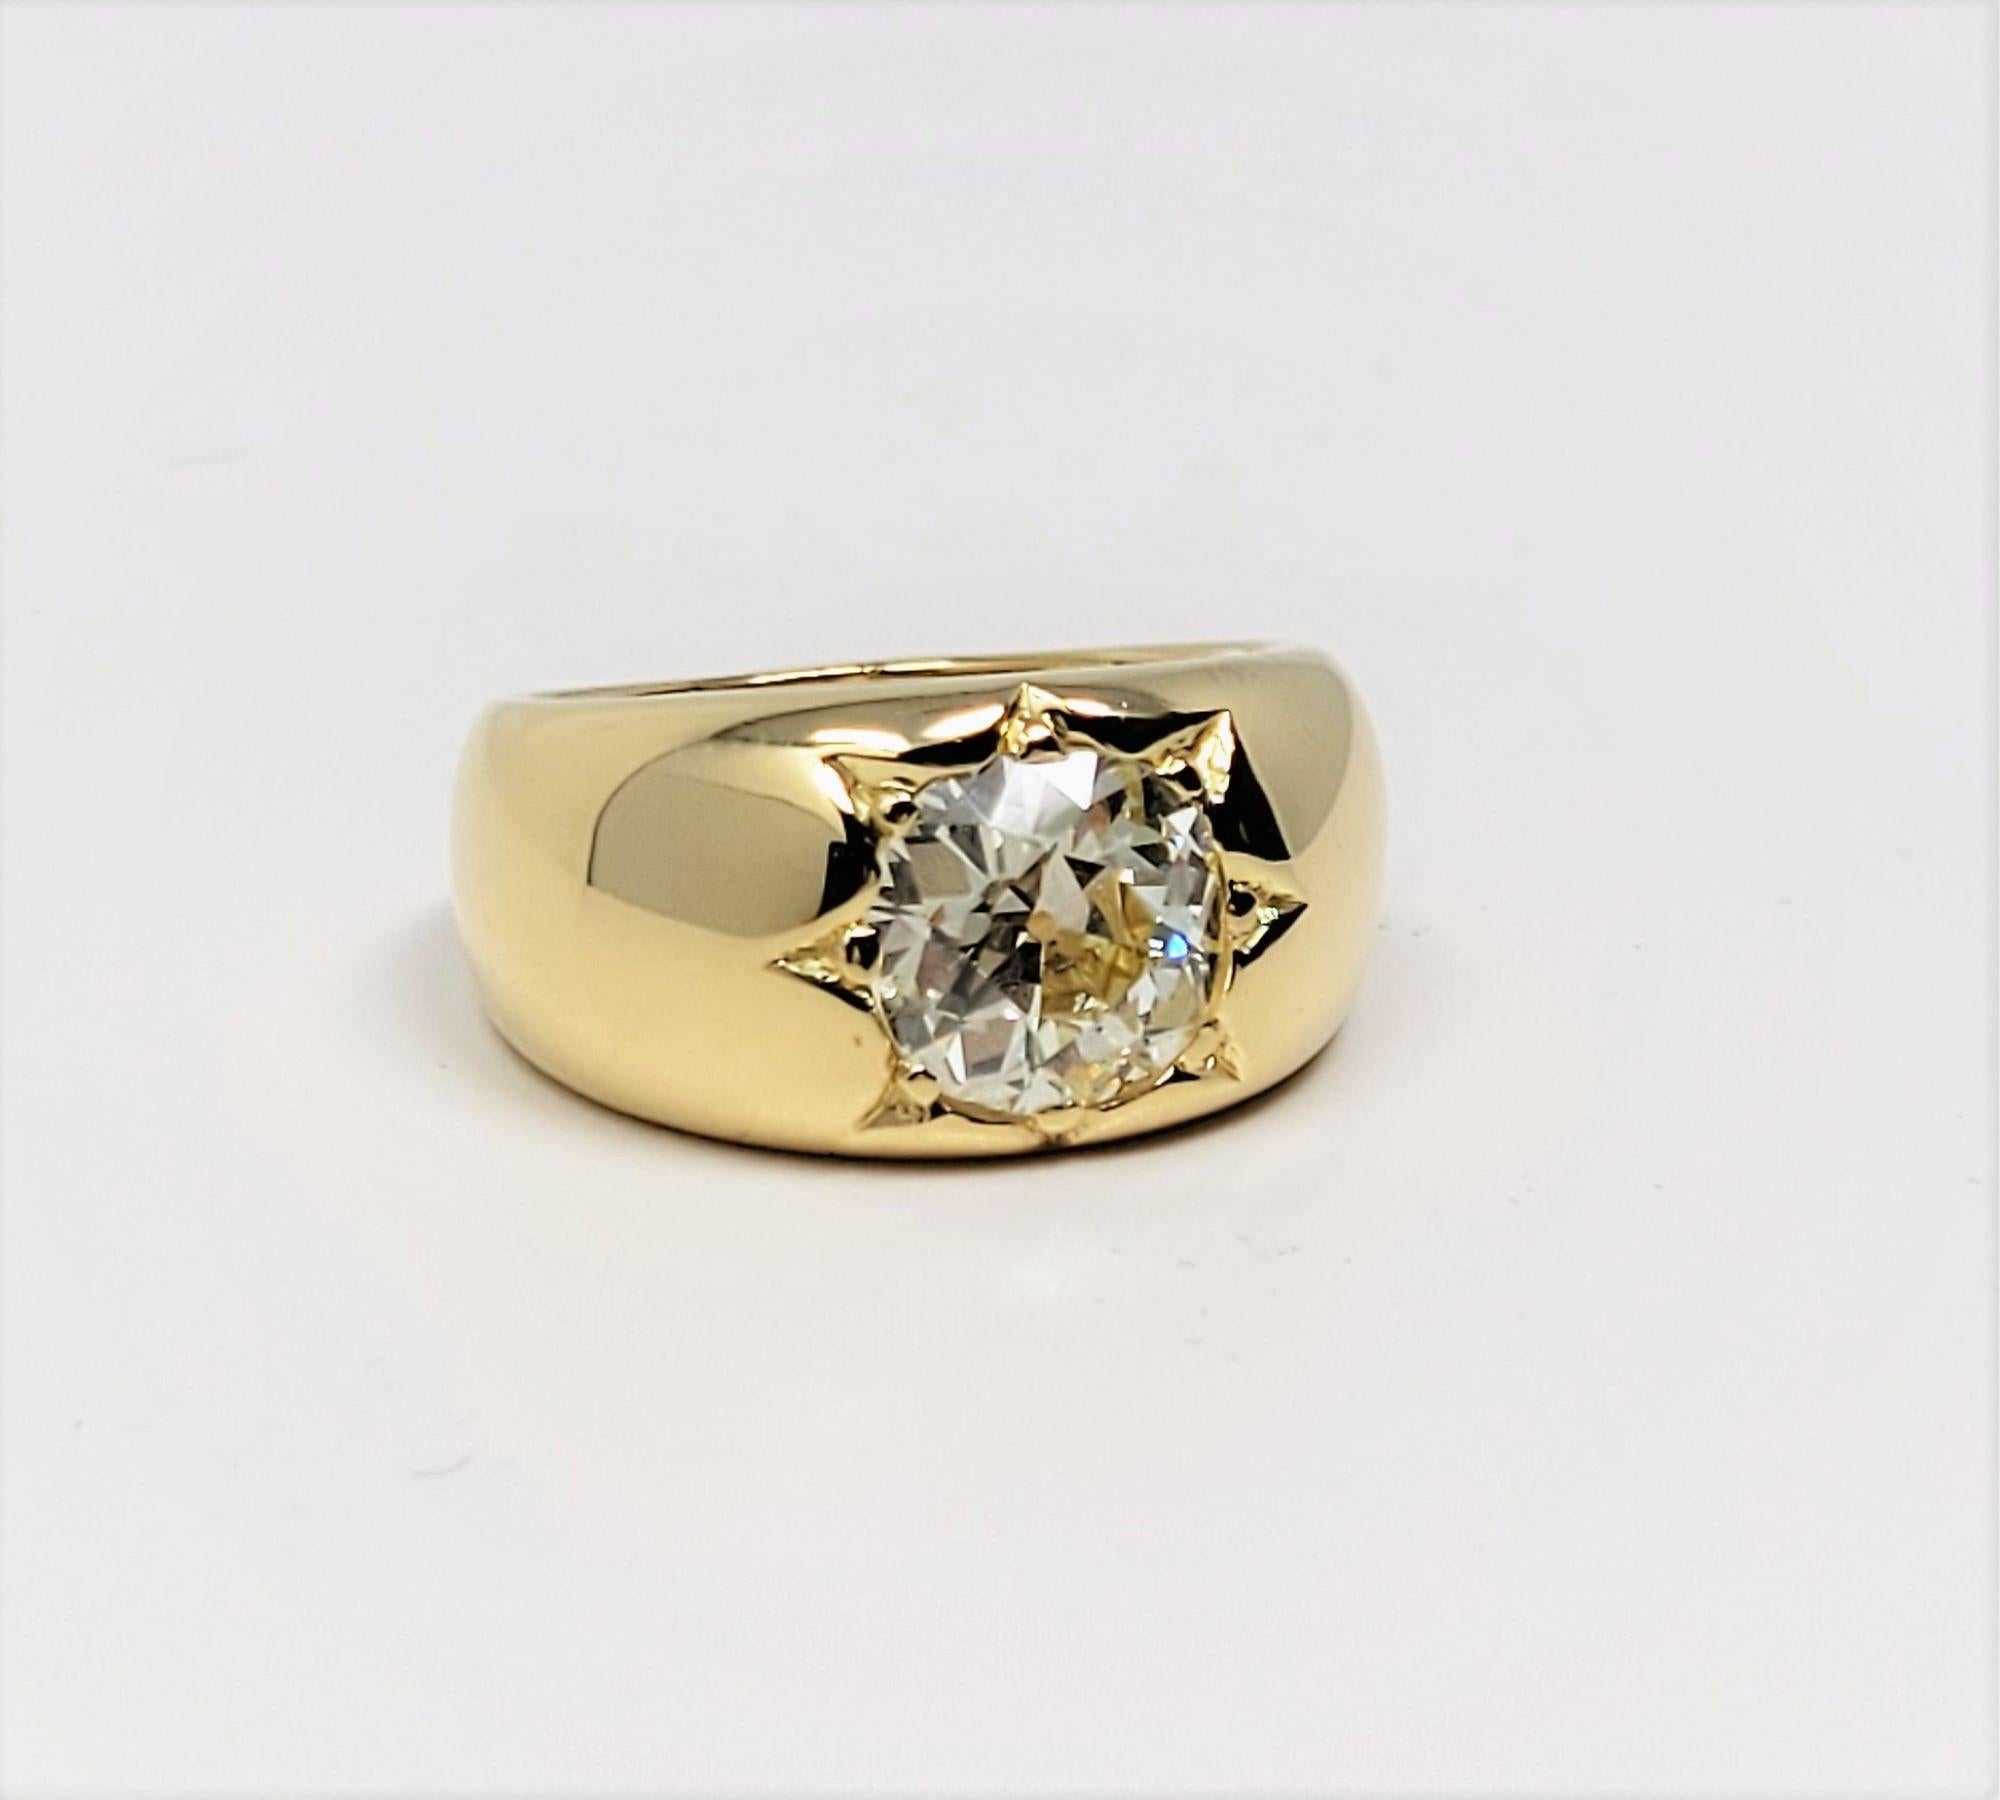 This beautiful 2.90 carat, old European-cut diamond is complimented by the 18 karat yellow gold, tapering, highly polished mounting.  The stone measures 9.22 mm x 9.66 mm x 5.02 mm and as is common with some of the older cuts from early 20th